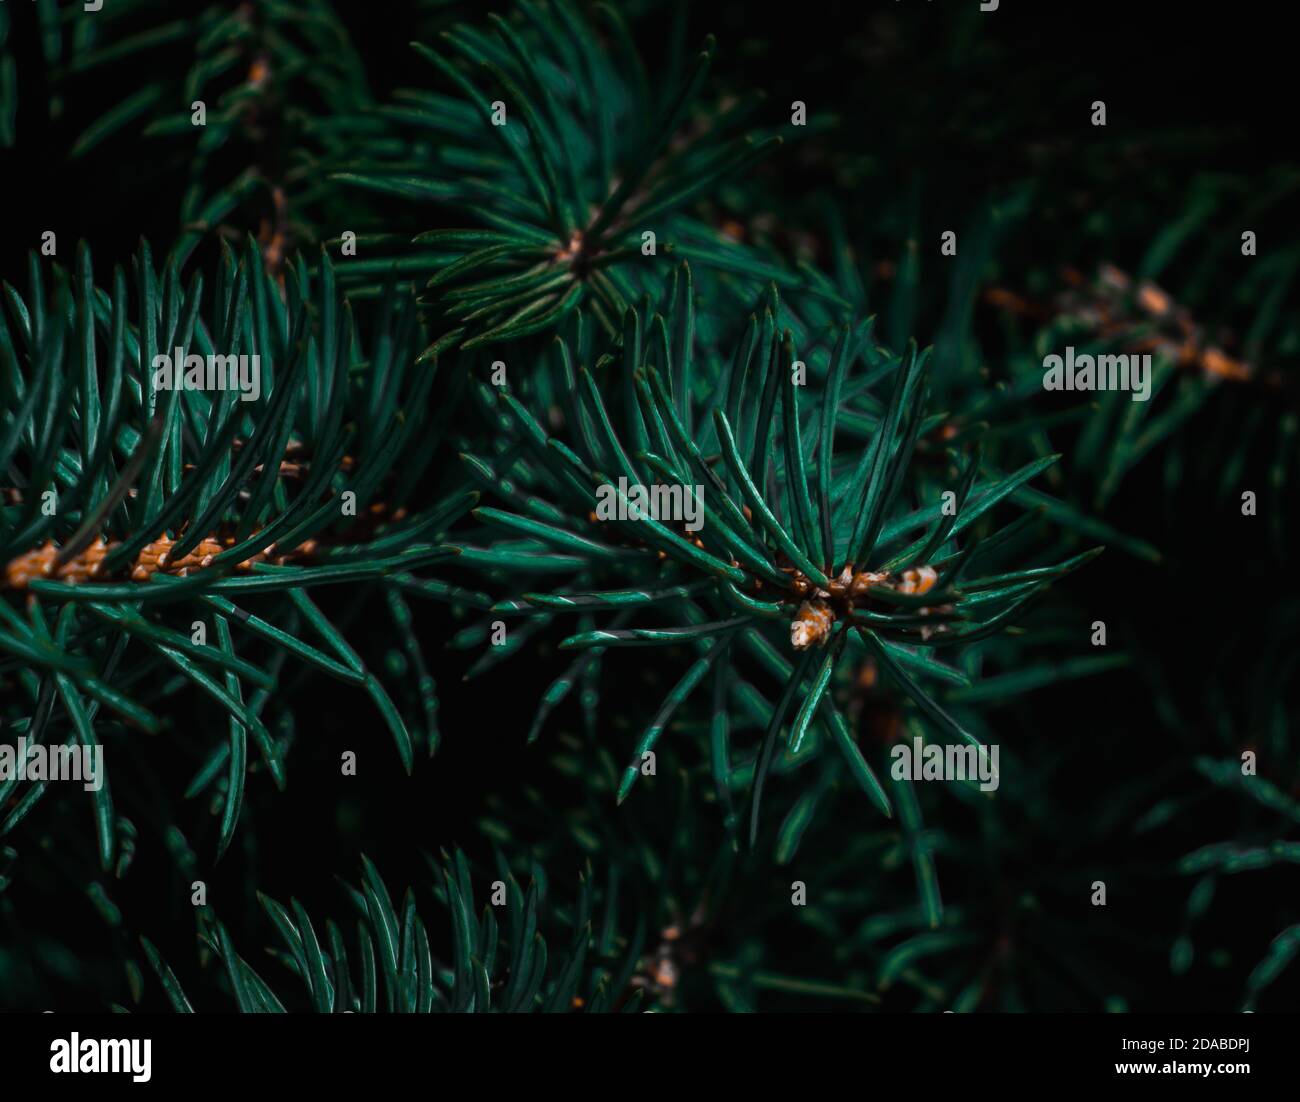 Pine Tree branches, cold weather nature Stock Photo